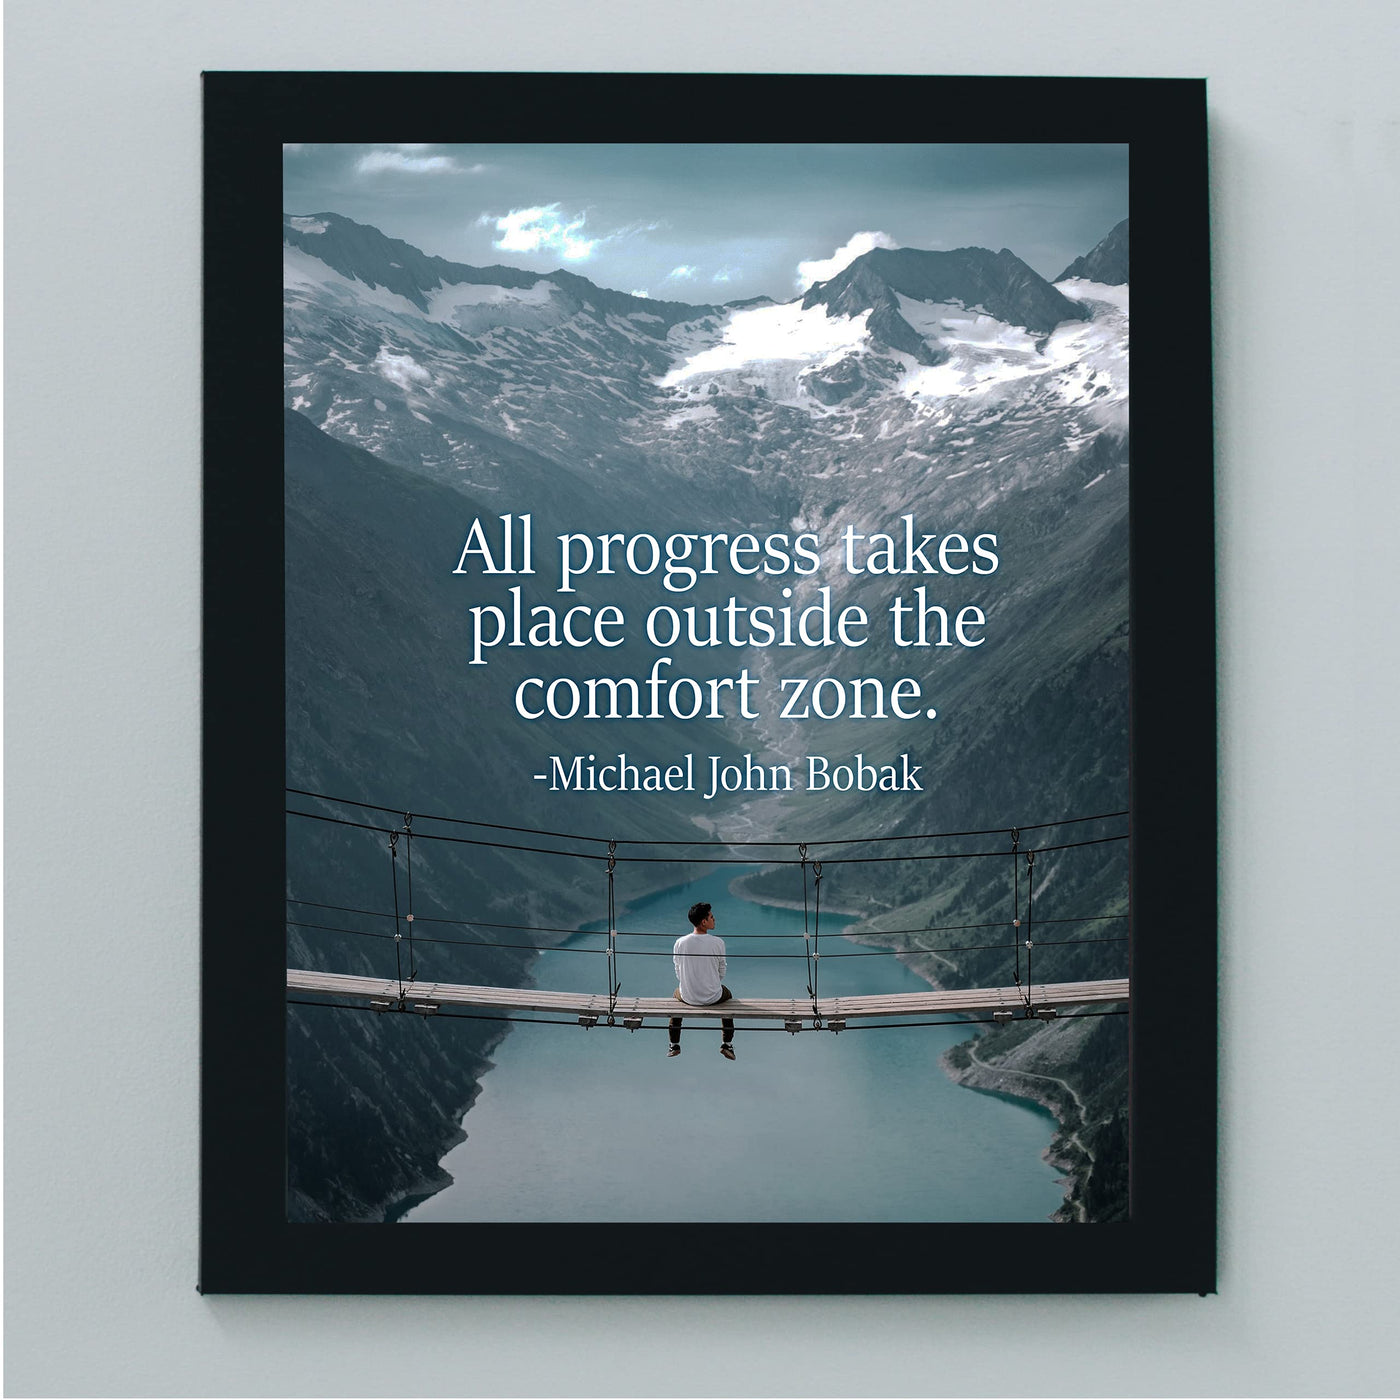 Progress Takes Place Outside the Comfort Zone Motivational Wall Art Print -8 x 10" Mountain Landscape Photo Print-Ready to Frame. Home-Office-Studio-School-Dorm Decor. Great Inspirational Gift!